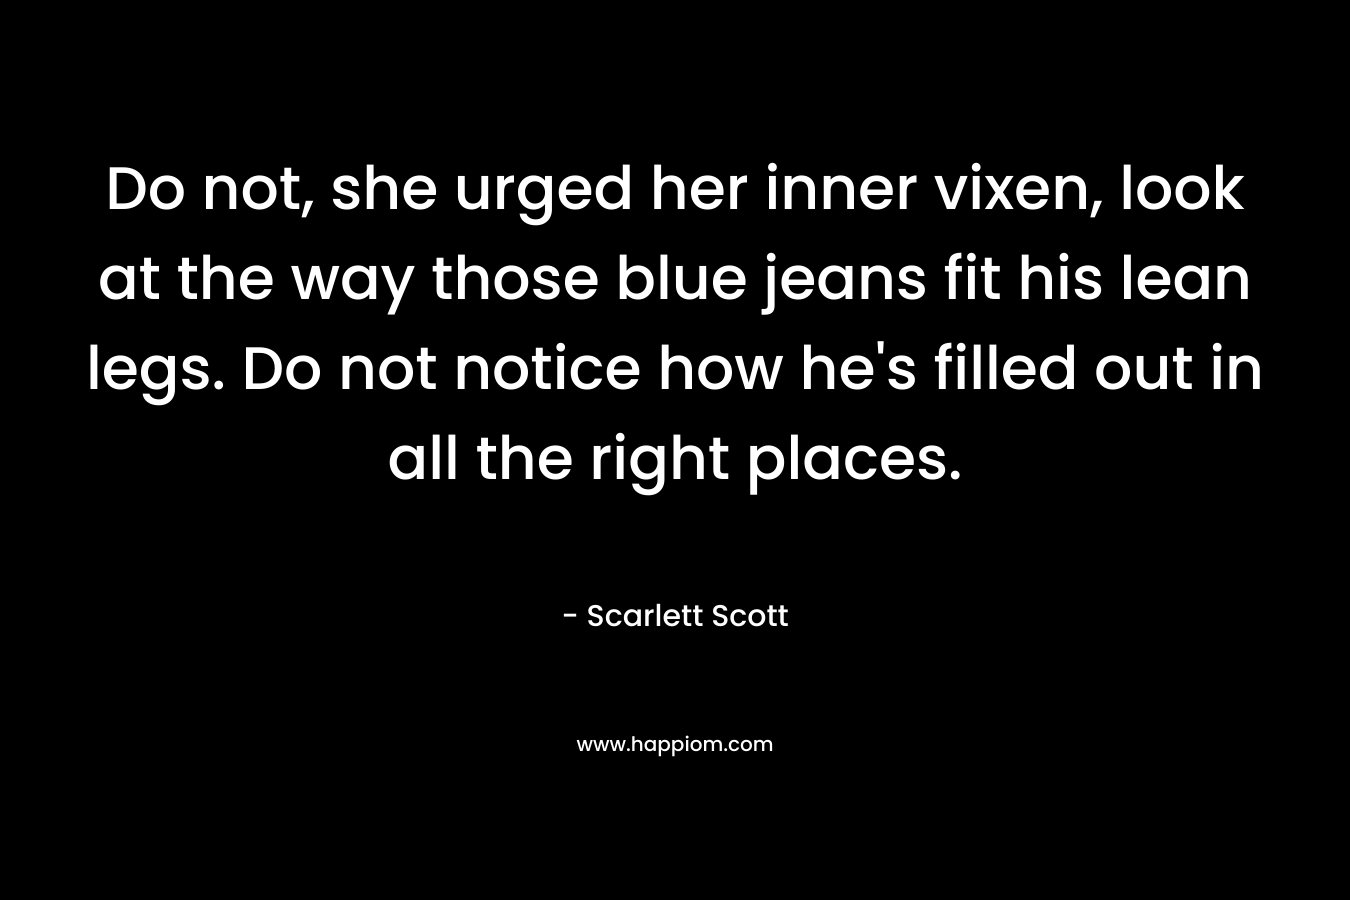 Do not, she urged her inner vixen, look at the way those blue jeans fit his lean legs. Do not notice how he’s filled out in all the right places. – Scarlett Scott